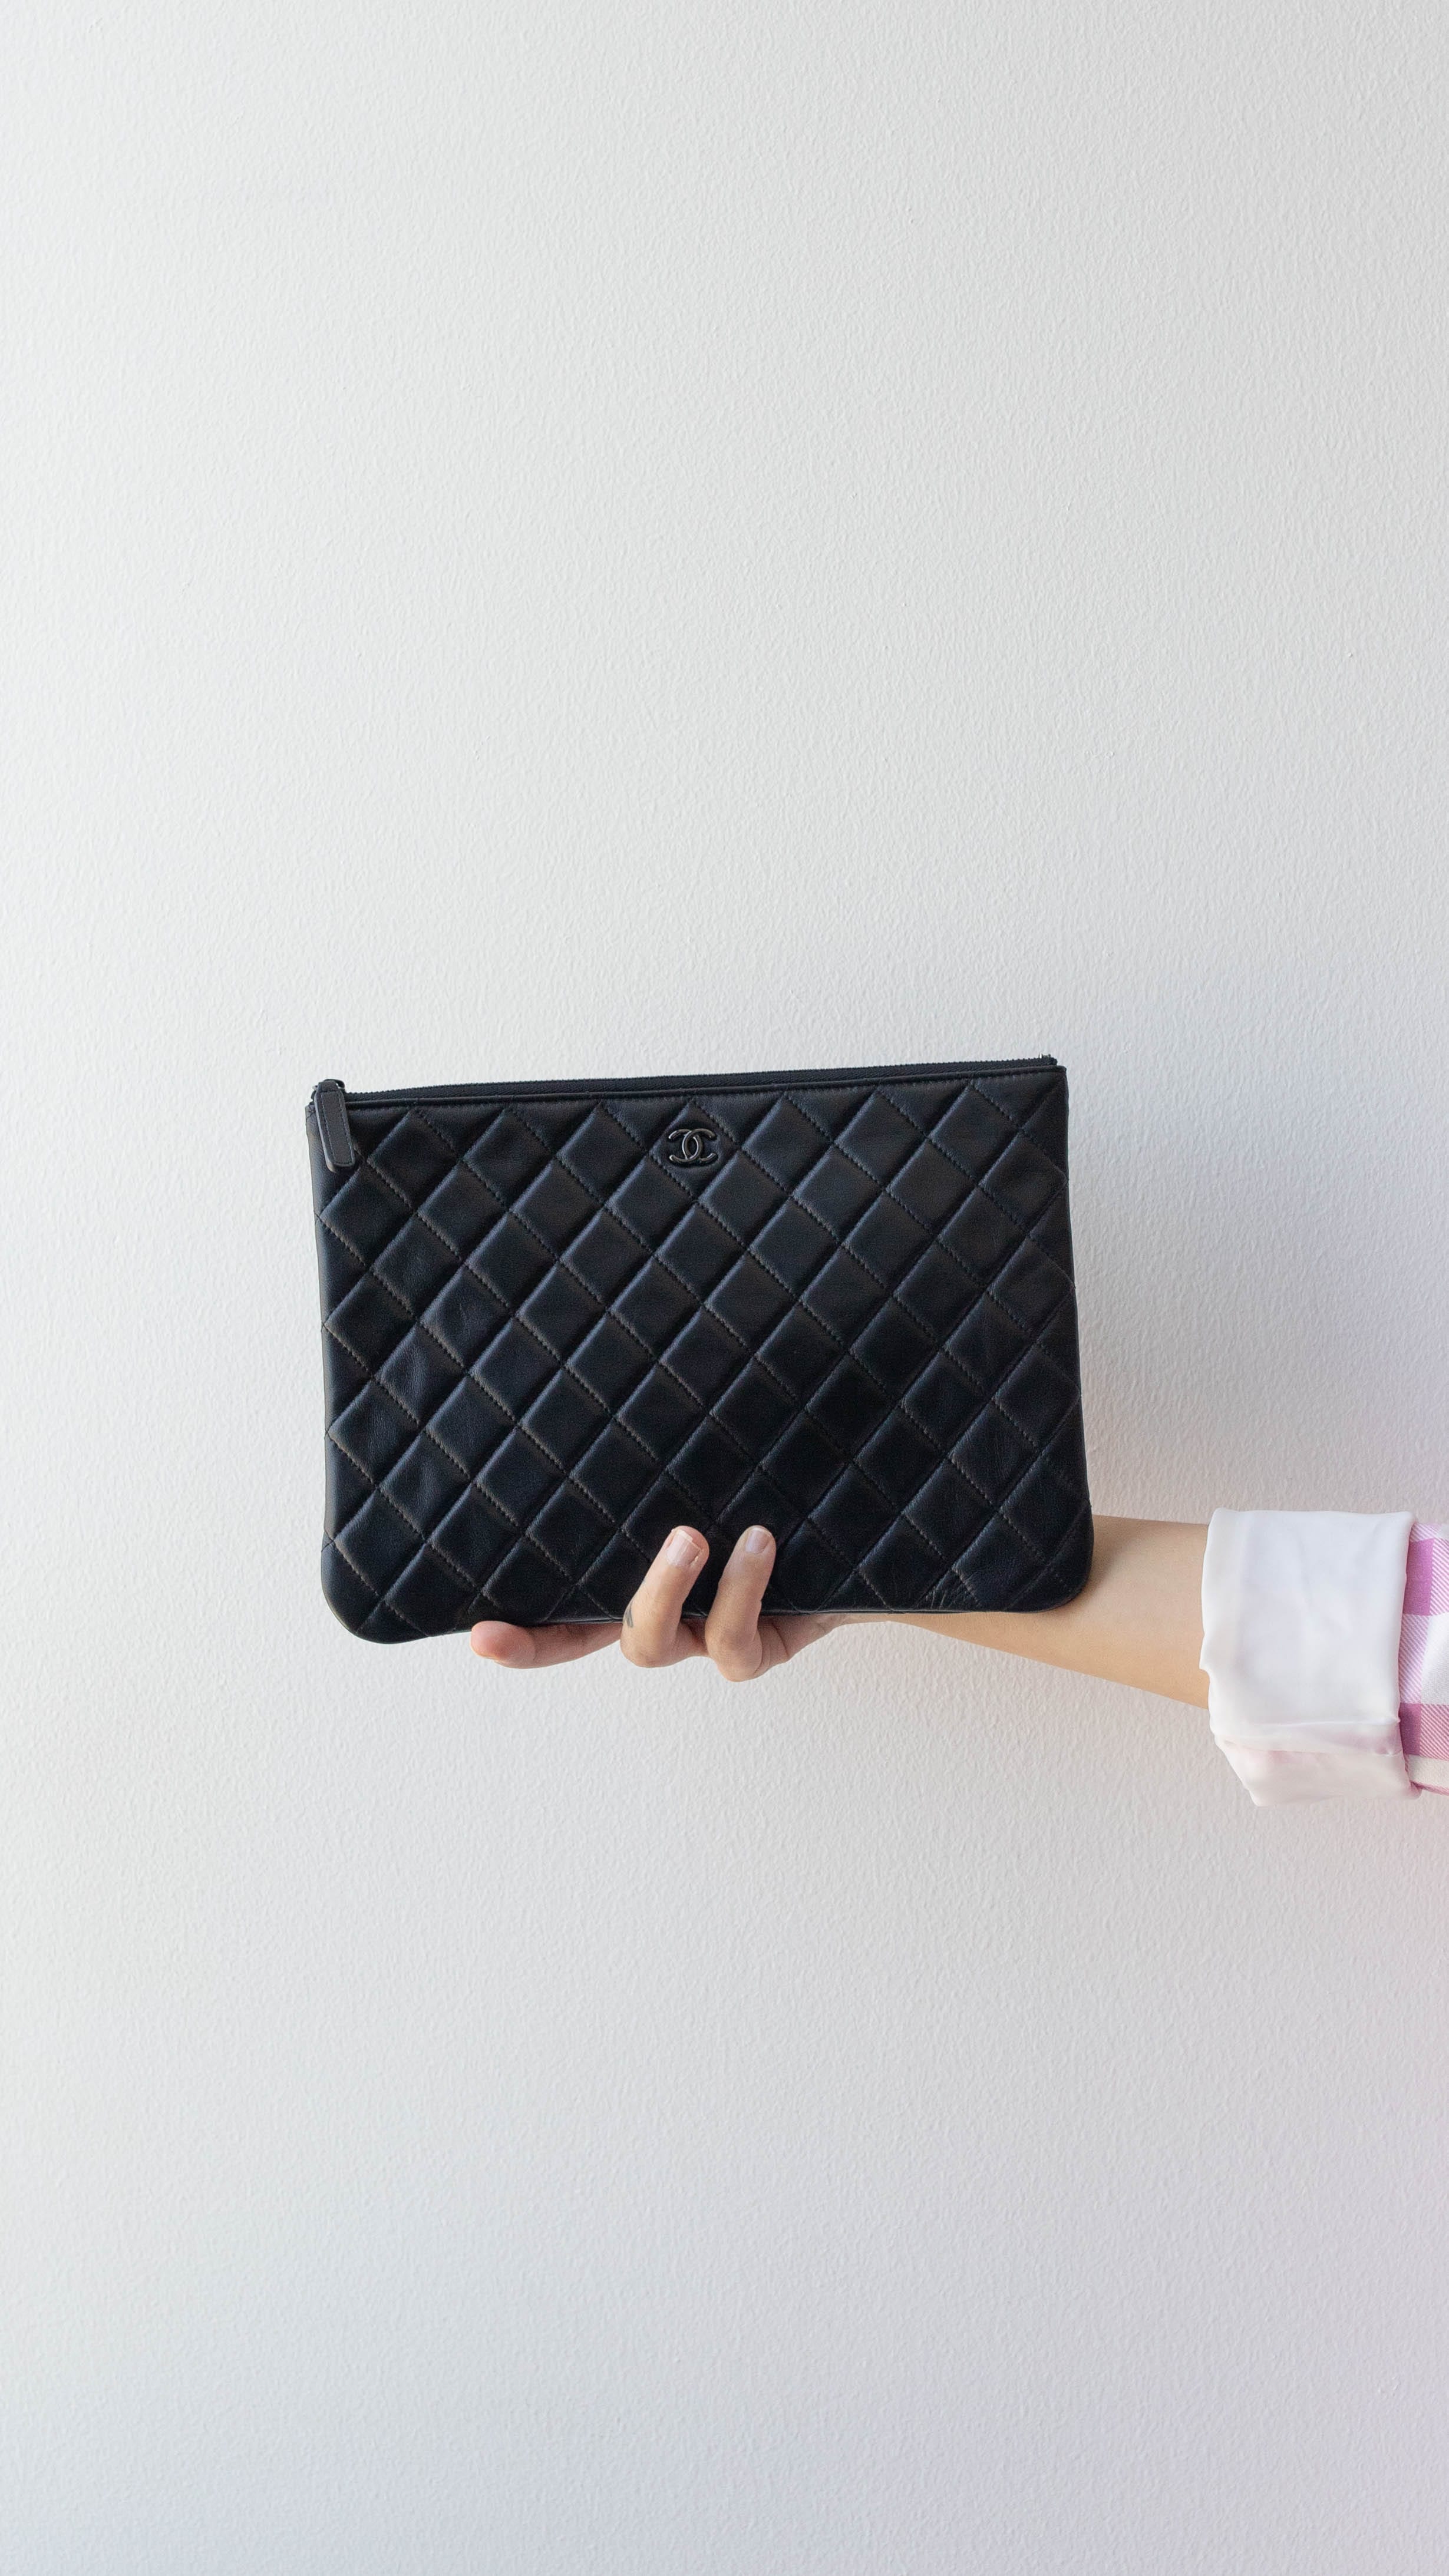 Chanel Authenticated Leather Clutch Bag